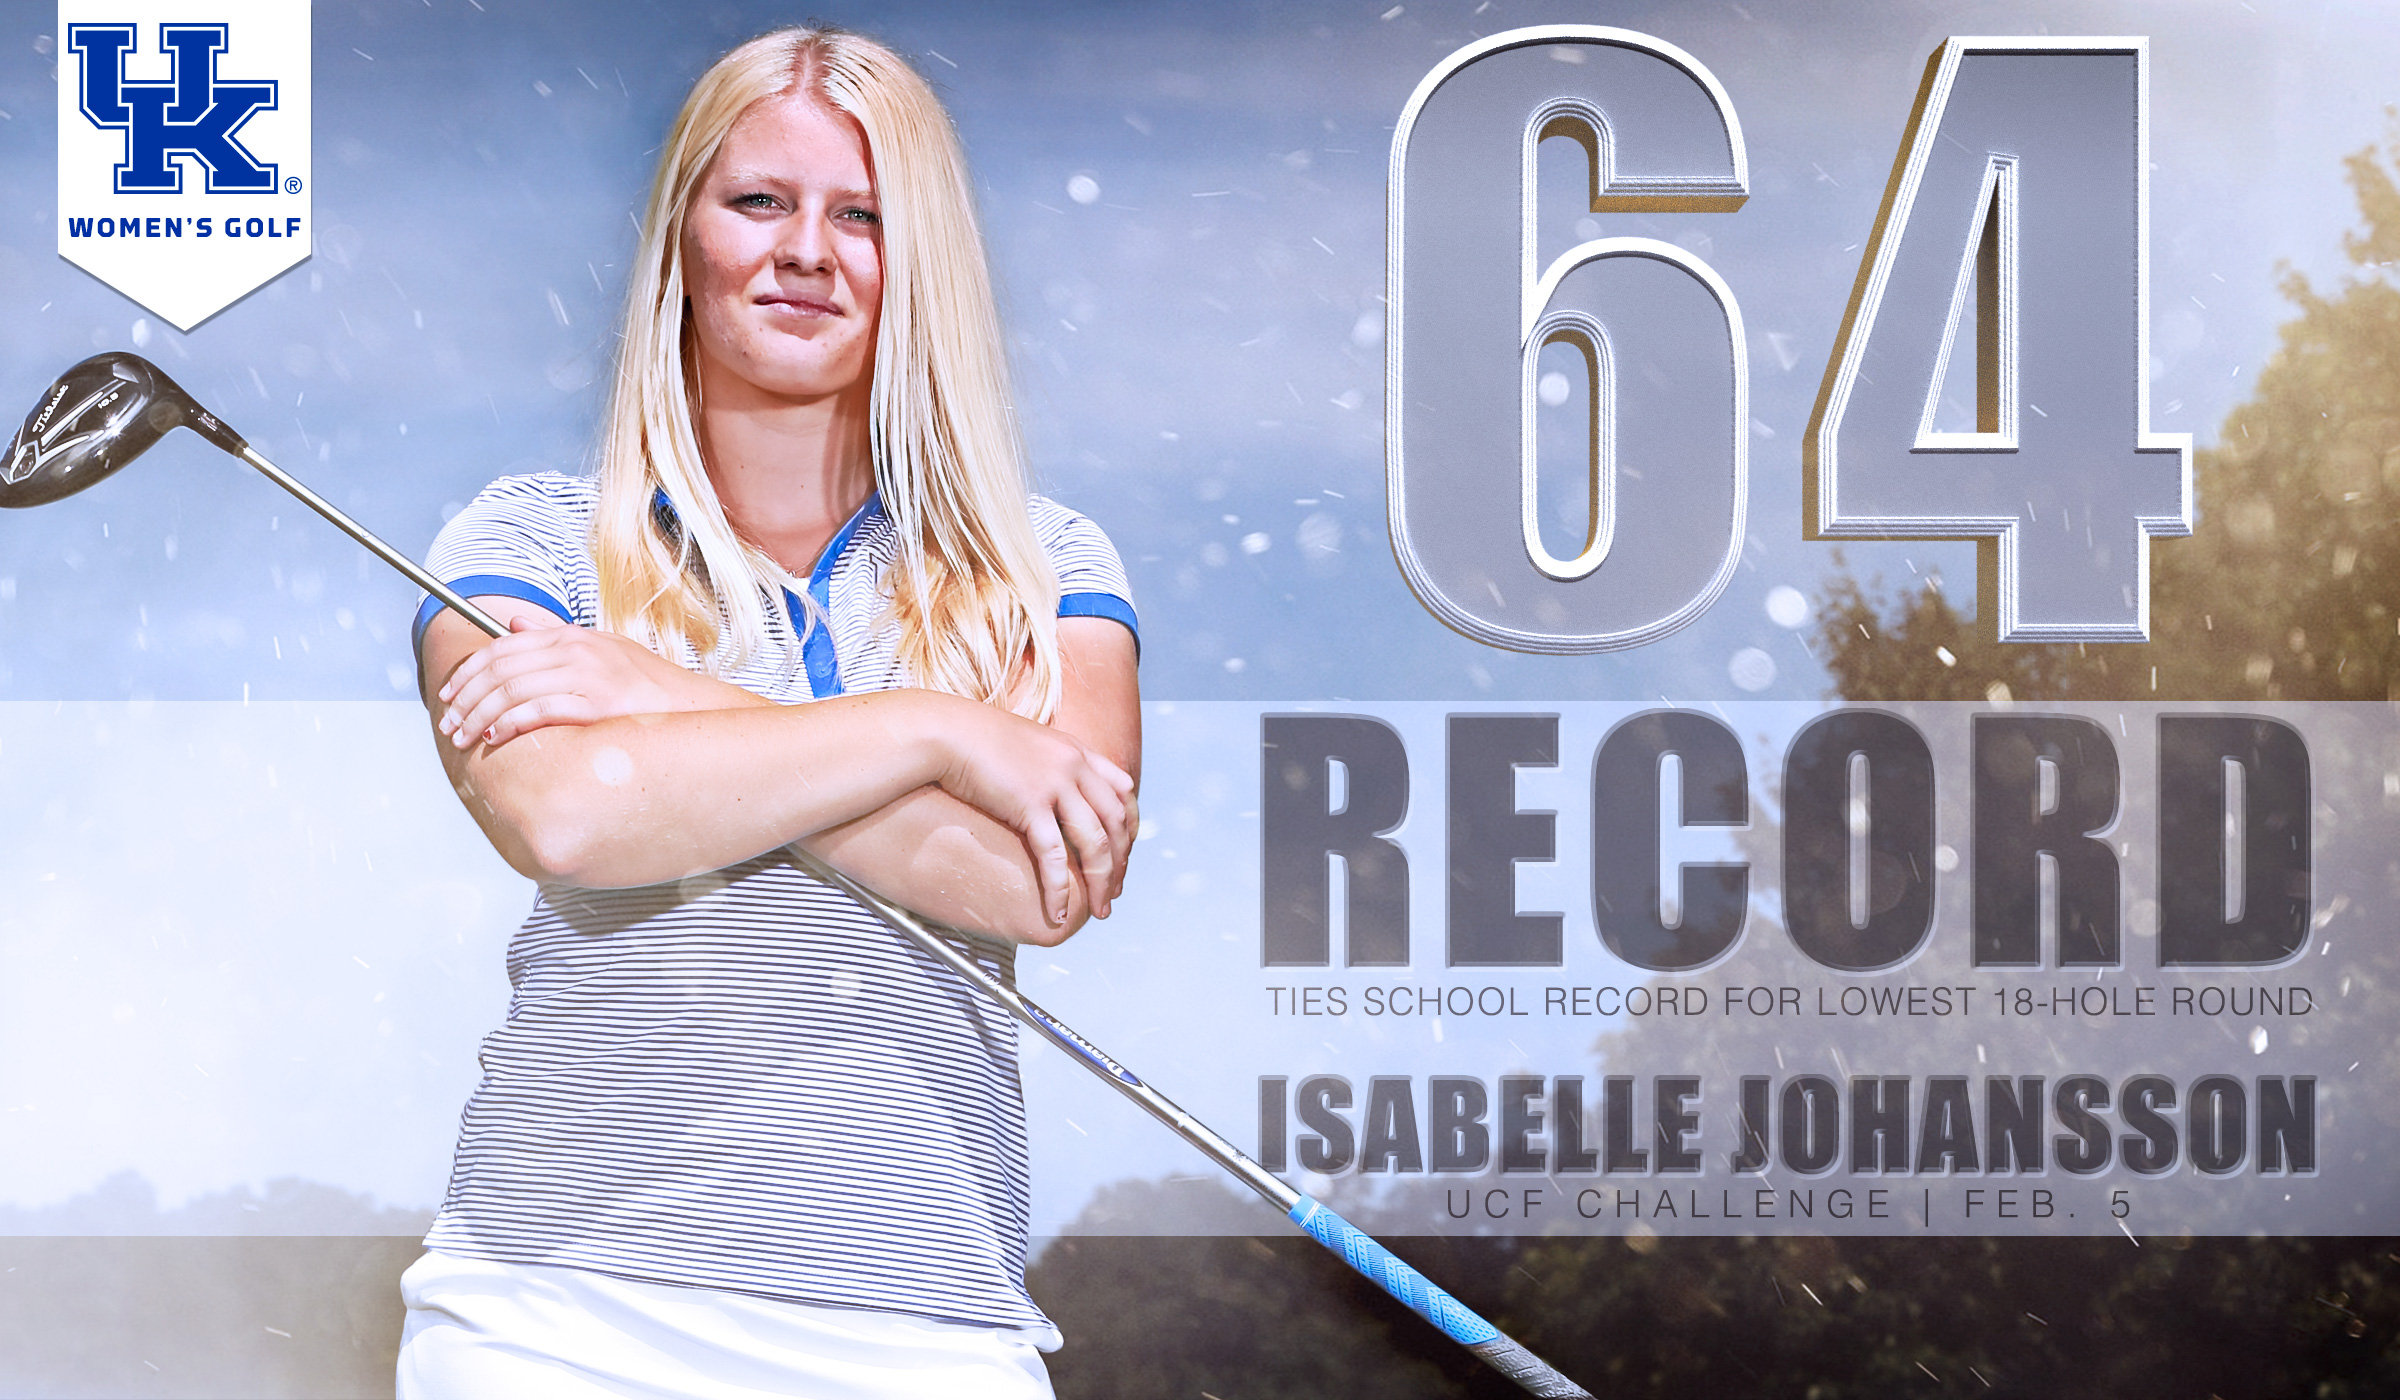 Johansson Ties 18-Hole School Record with 64 at UCF Challenge